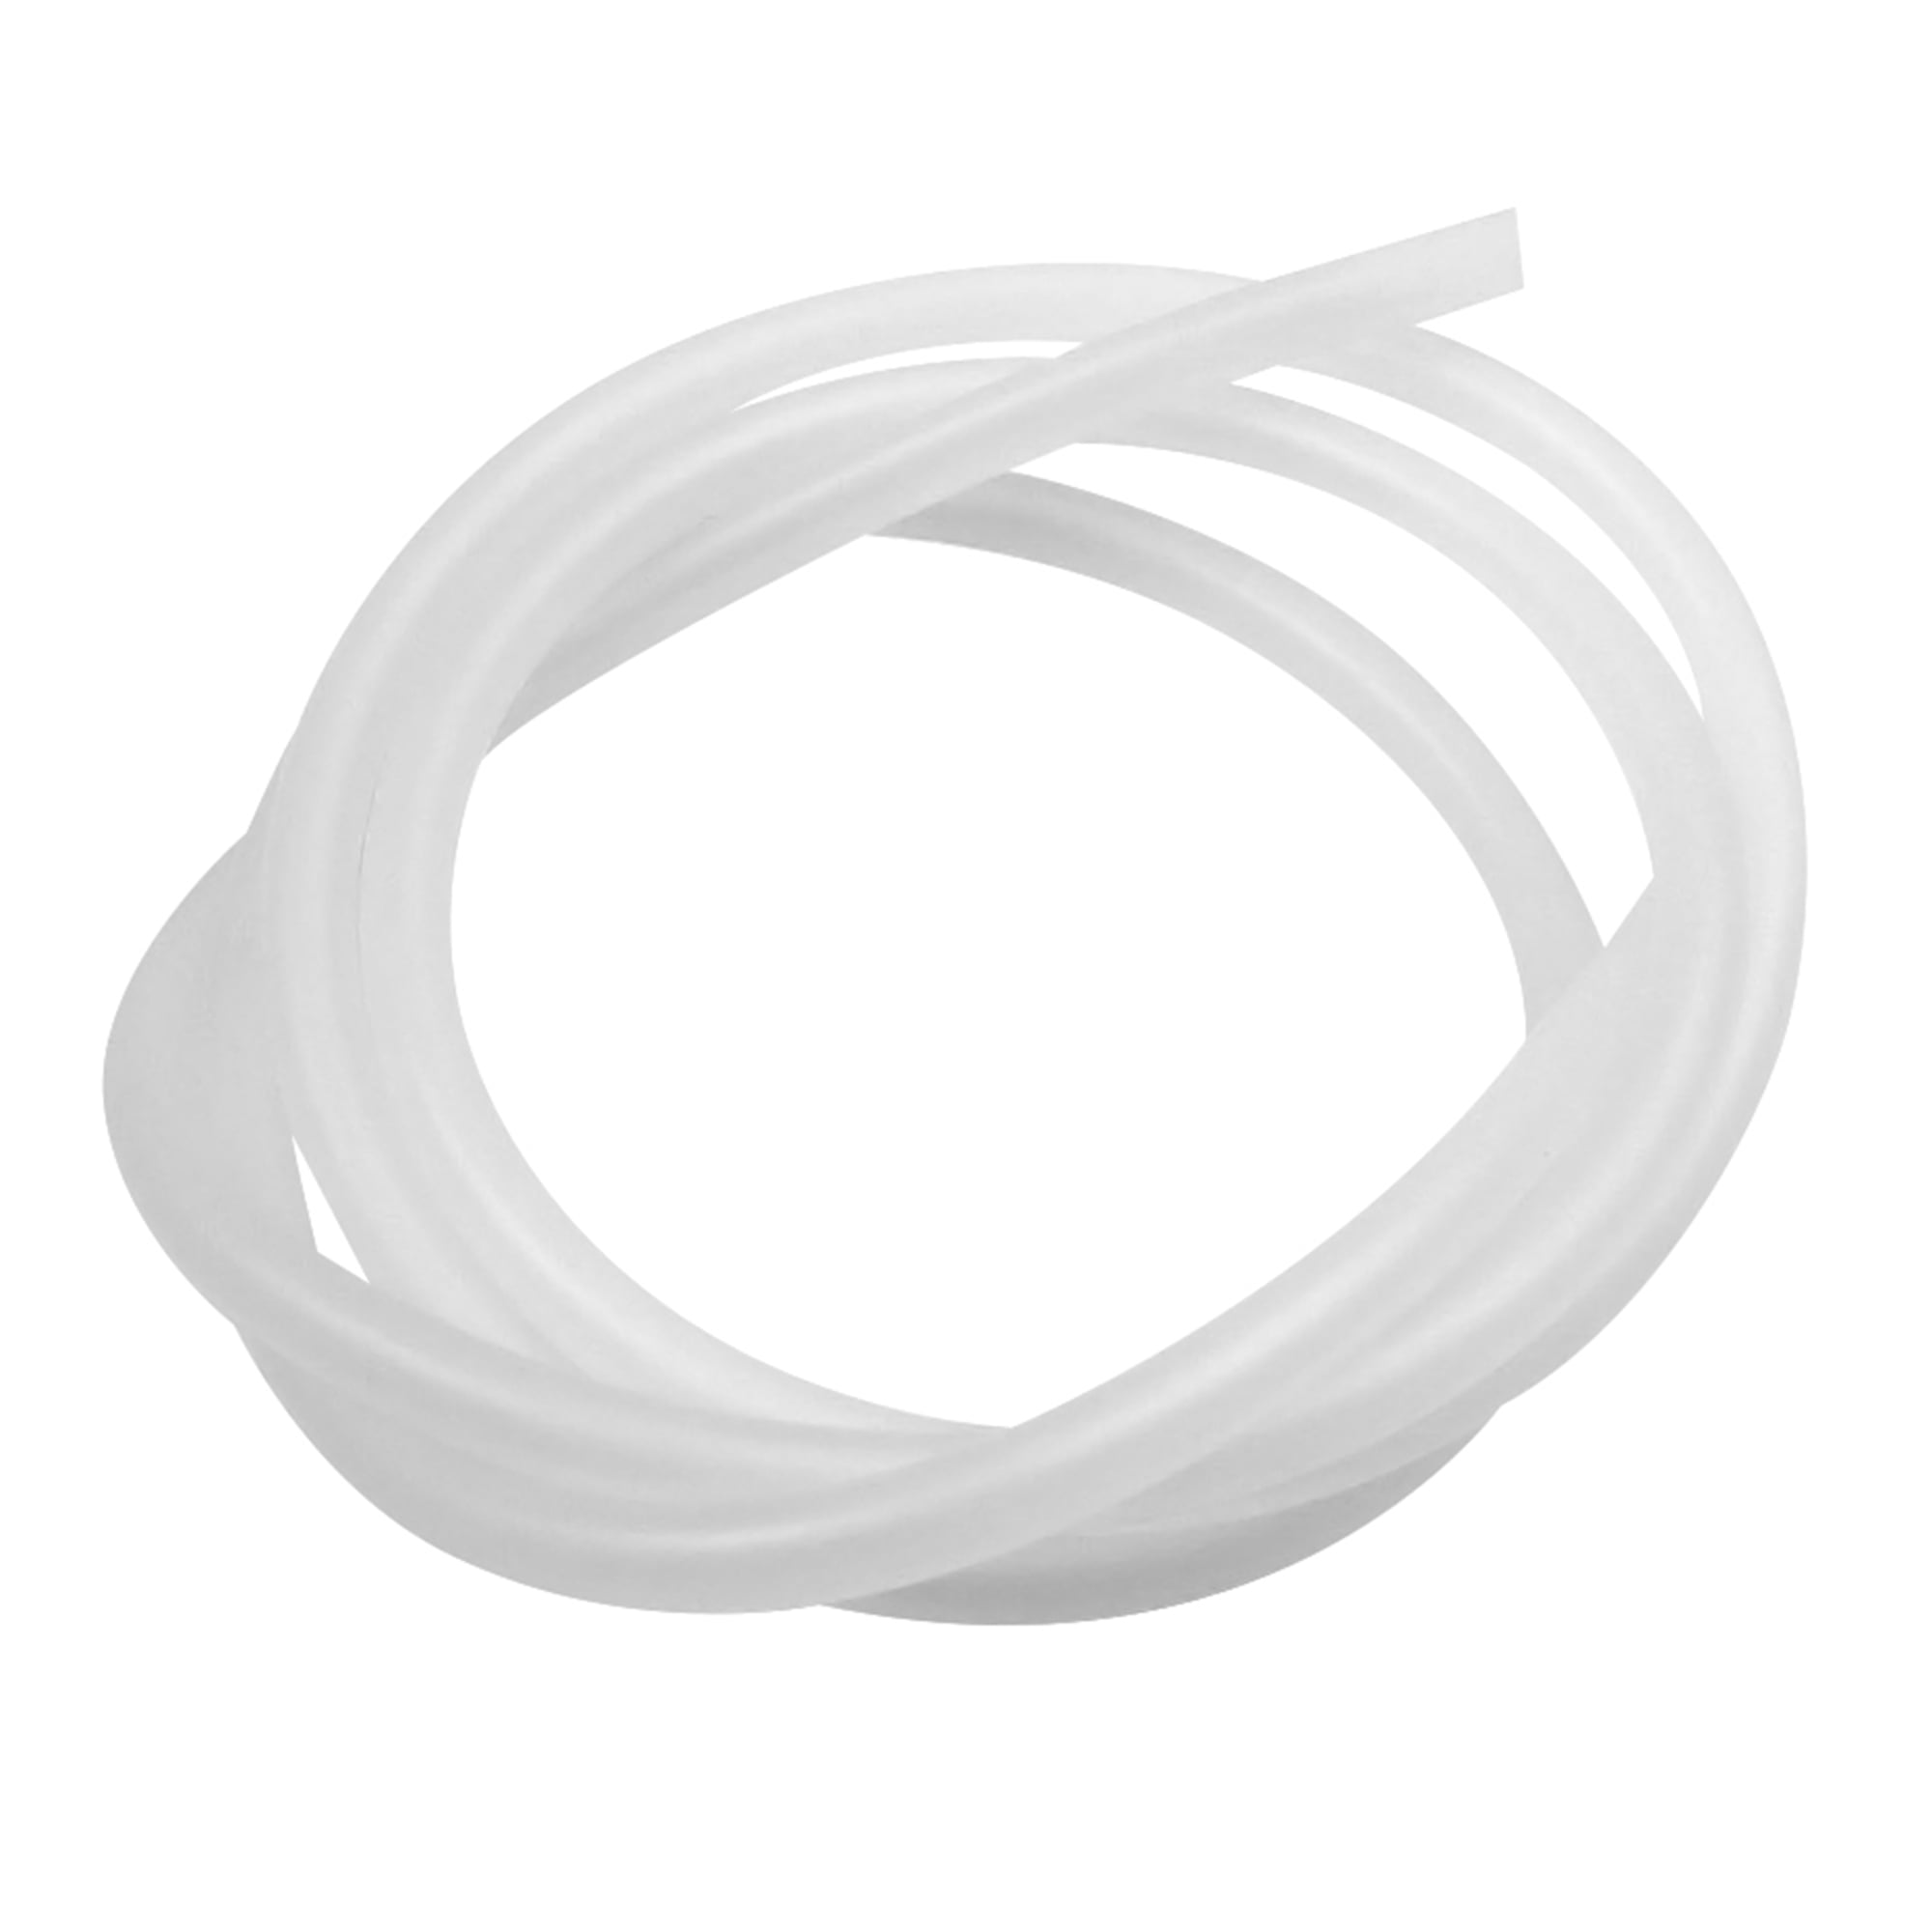 OCSParts 117094 SiliconeTubing 1/4ID 1/16 Wall Sold by The Foot 3/8OD 